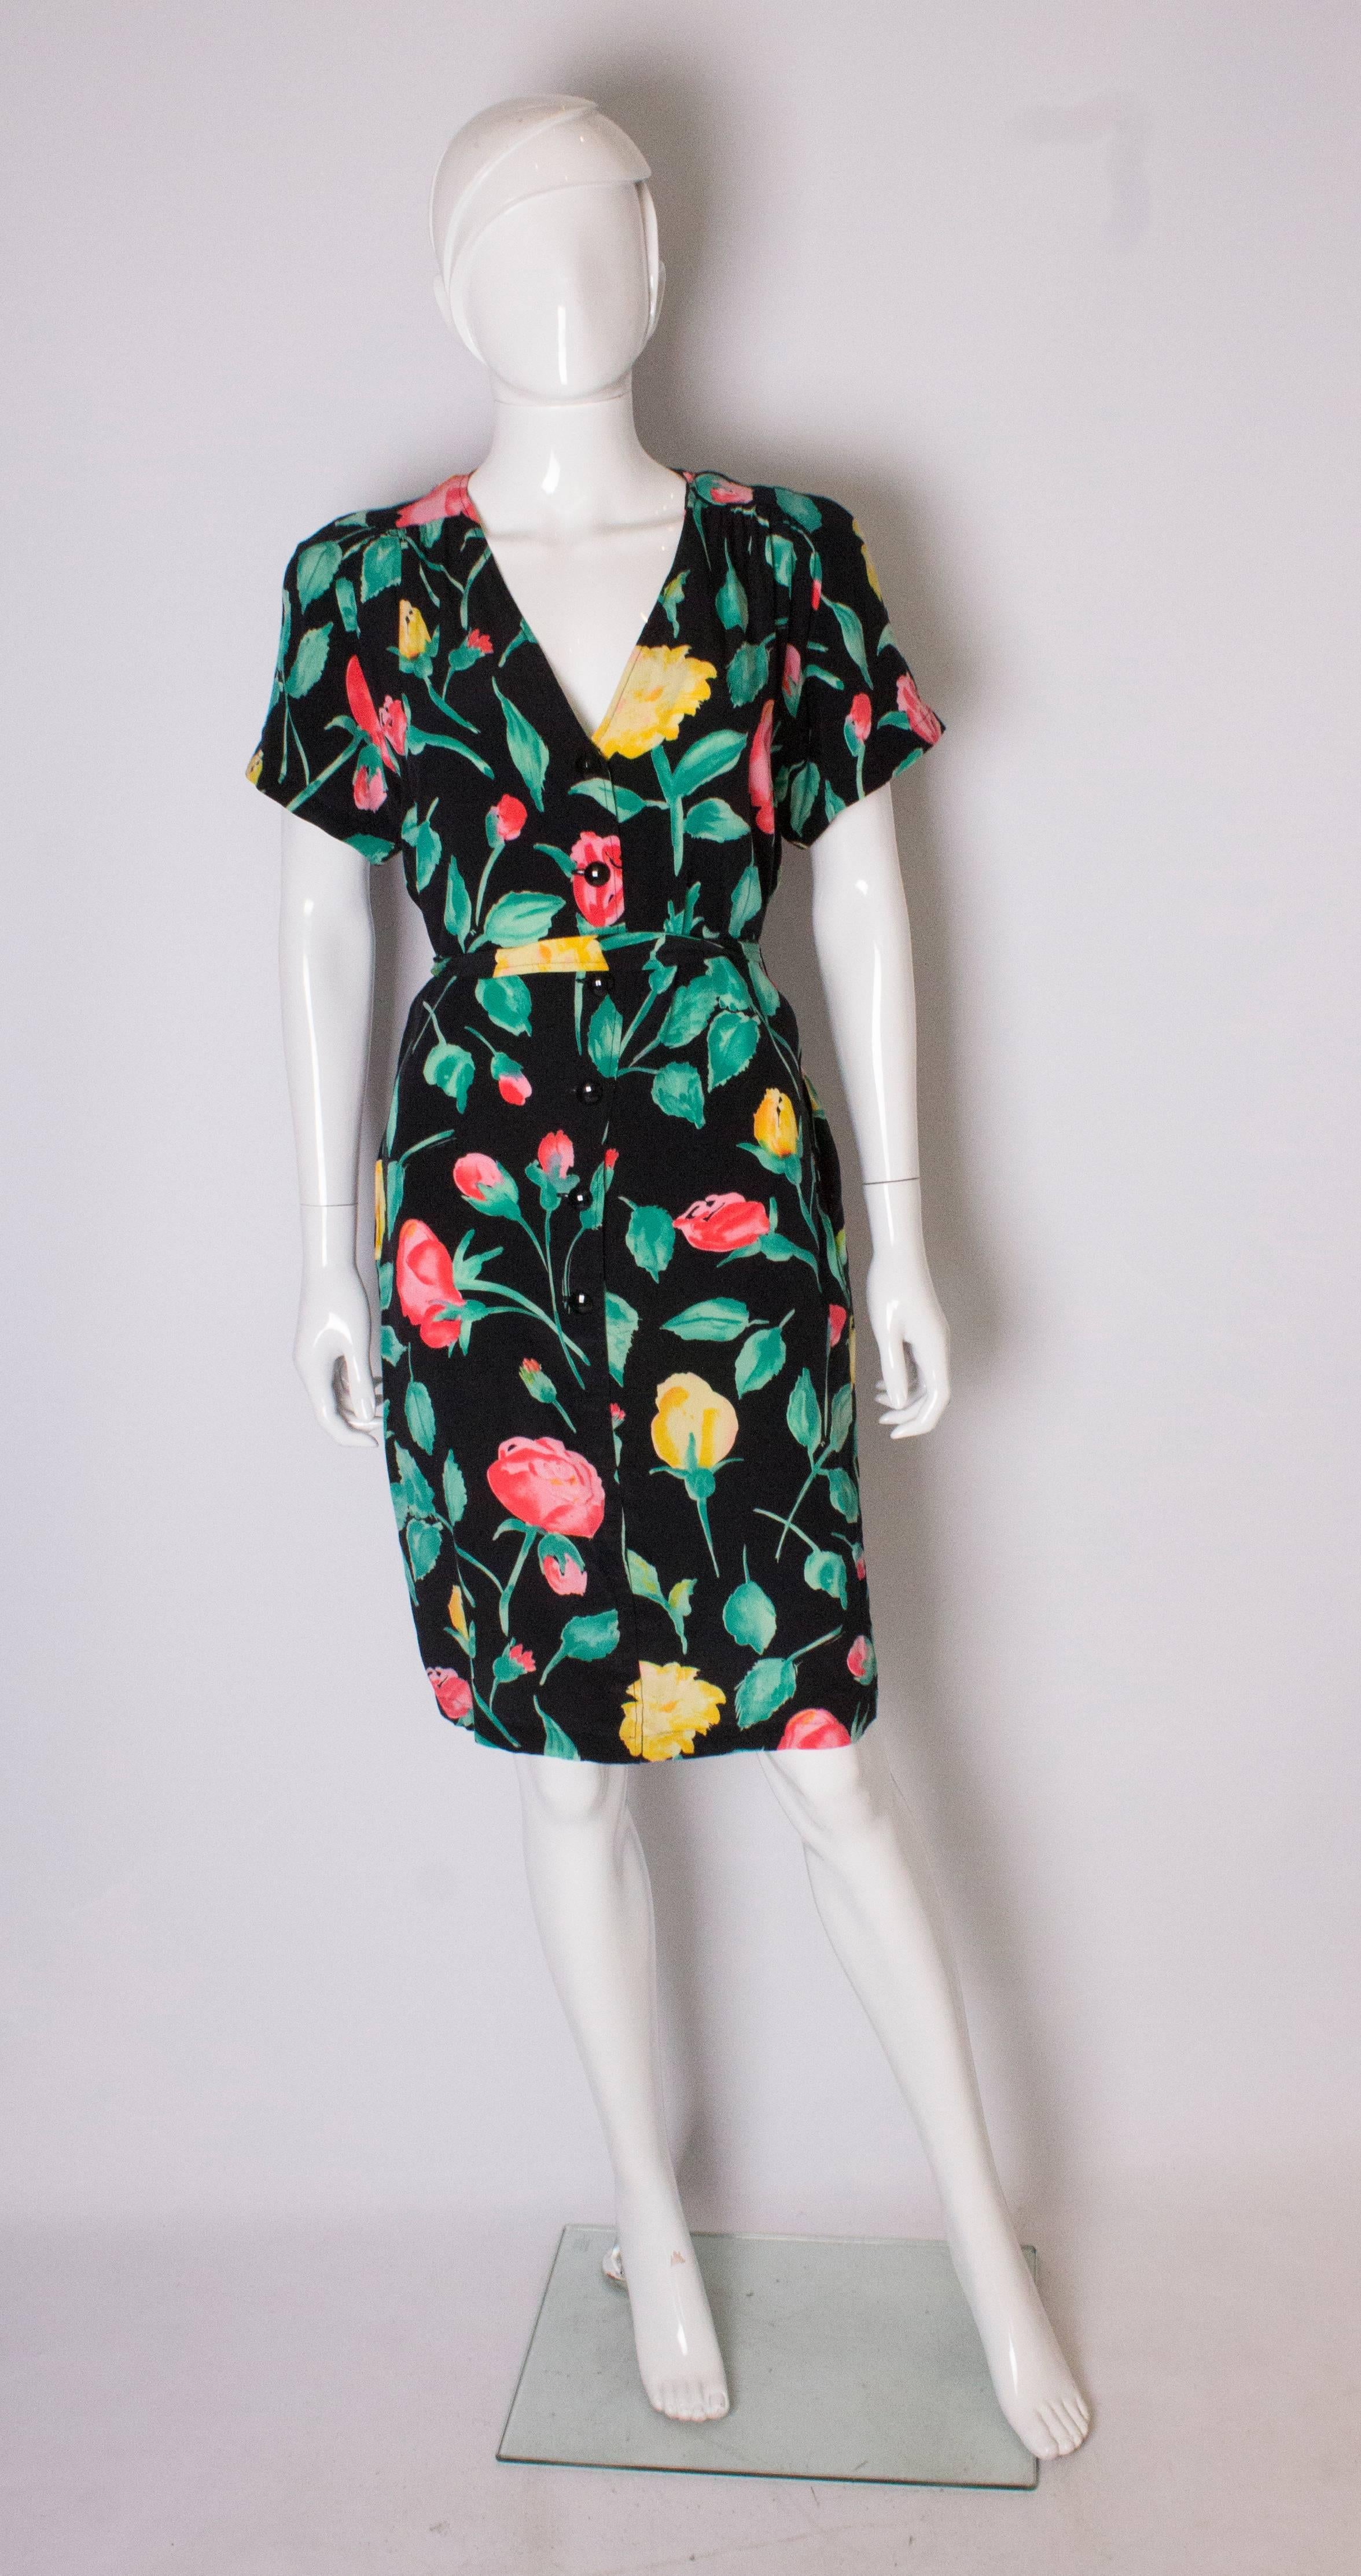 A chic silk  dress for Summer by Italian firm Ungaro. The dress is in silk,  and has a black background with a floral print in  yellow, green, red and pink. It has a v neckline, a self fabric belt , gathering at the shoulders and button through